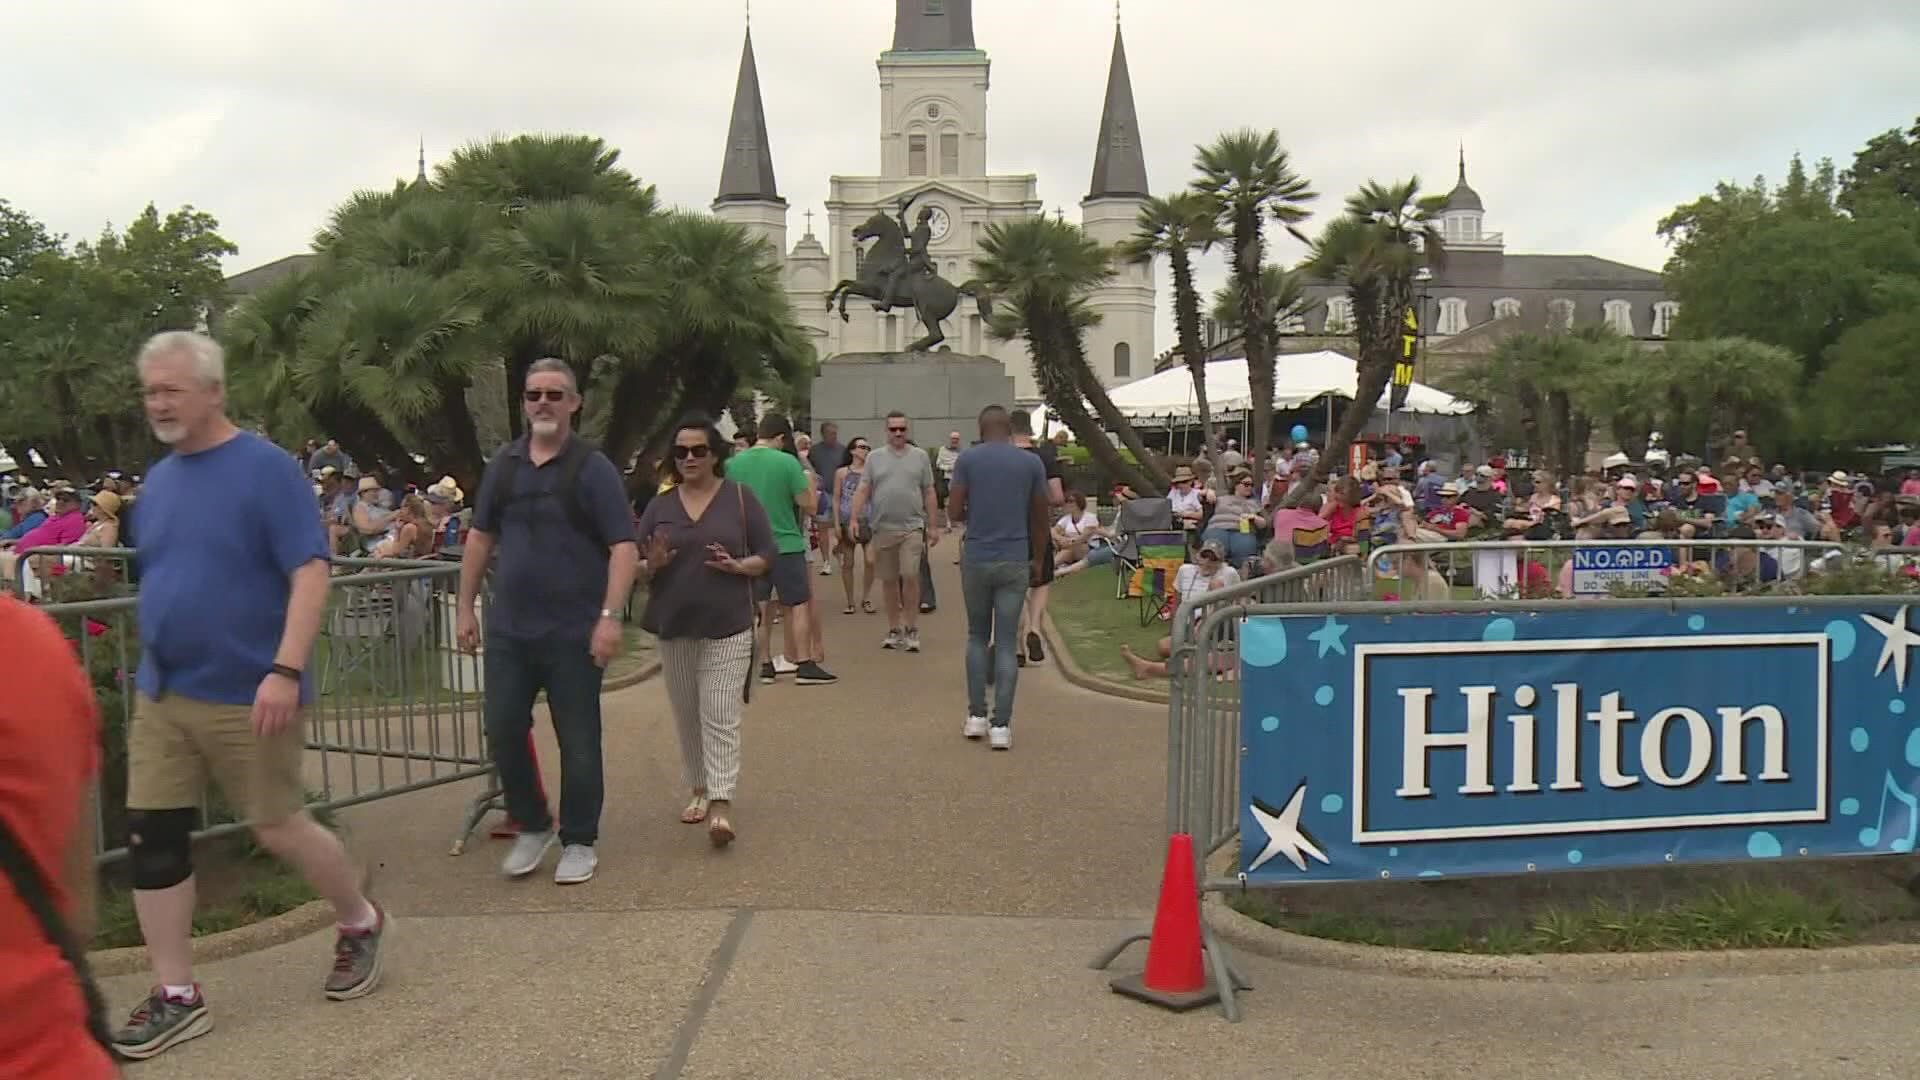 NOLA artist and businesses are anticipating the return of the French Quarter Fest to the city this weekend. Officials are also ready for safety.